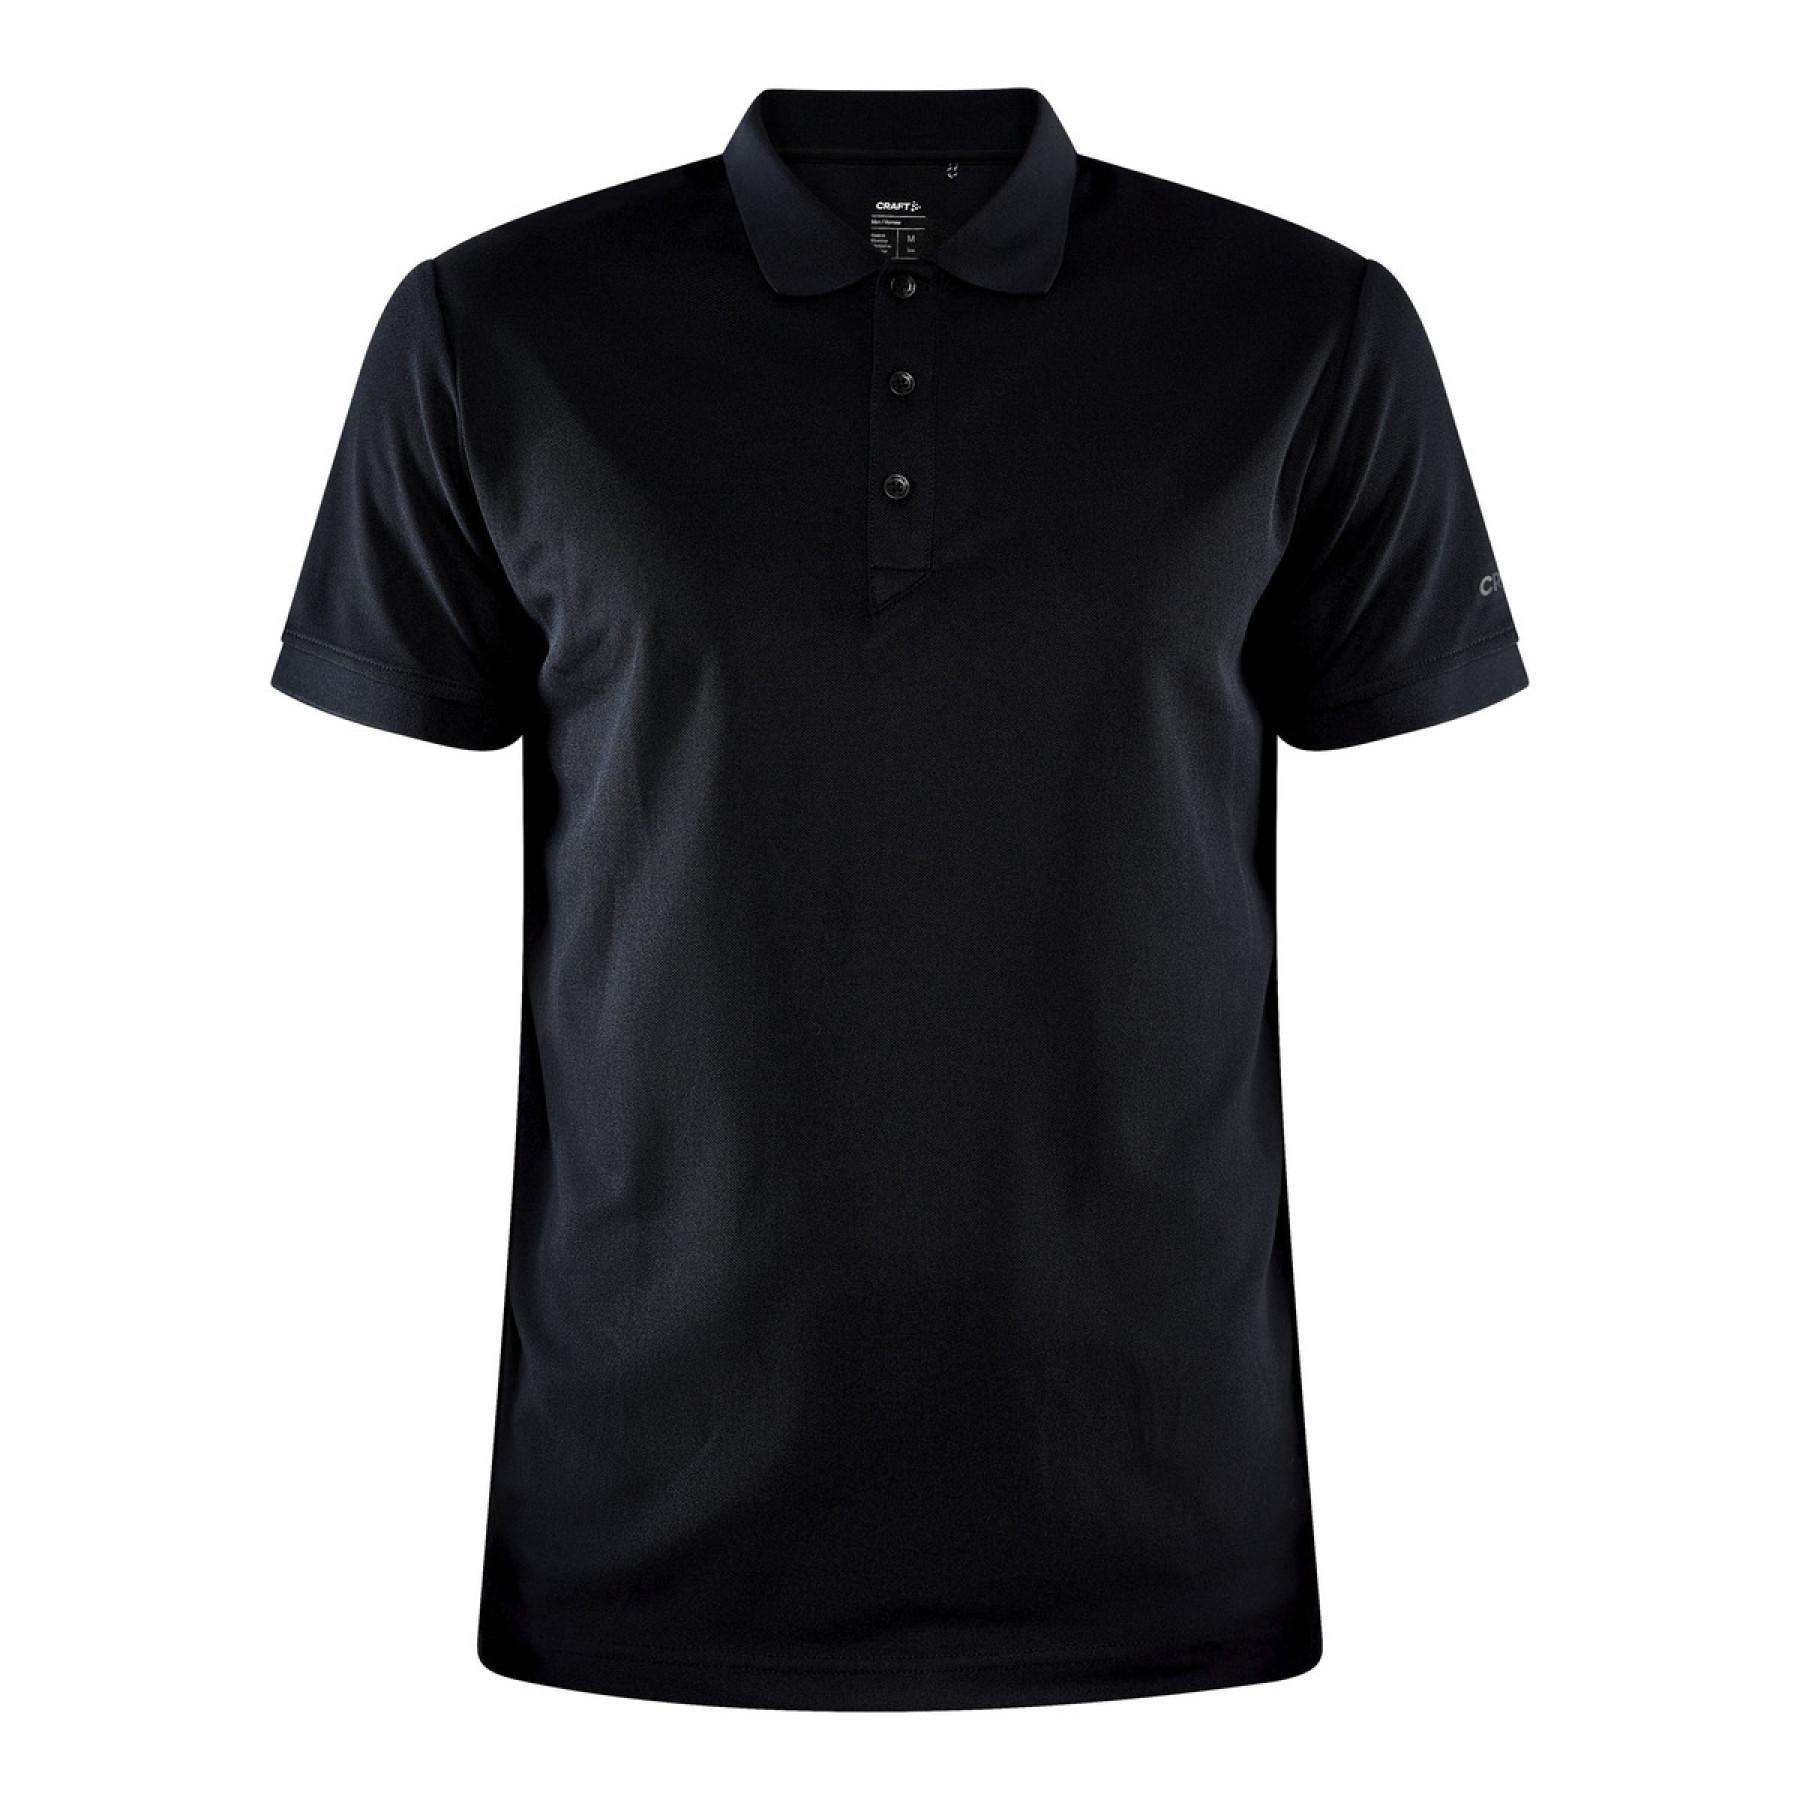 Polo Craft core unify - T-shirts and polos - Textile - Handball wear